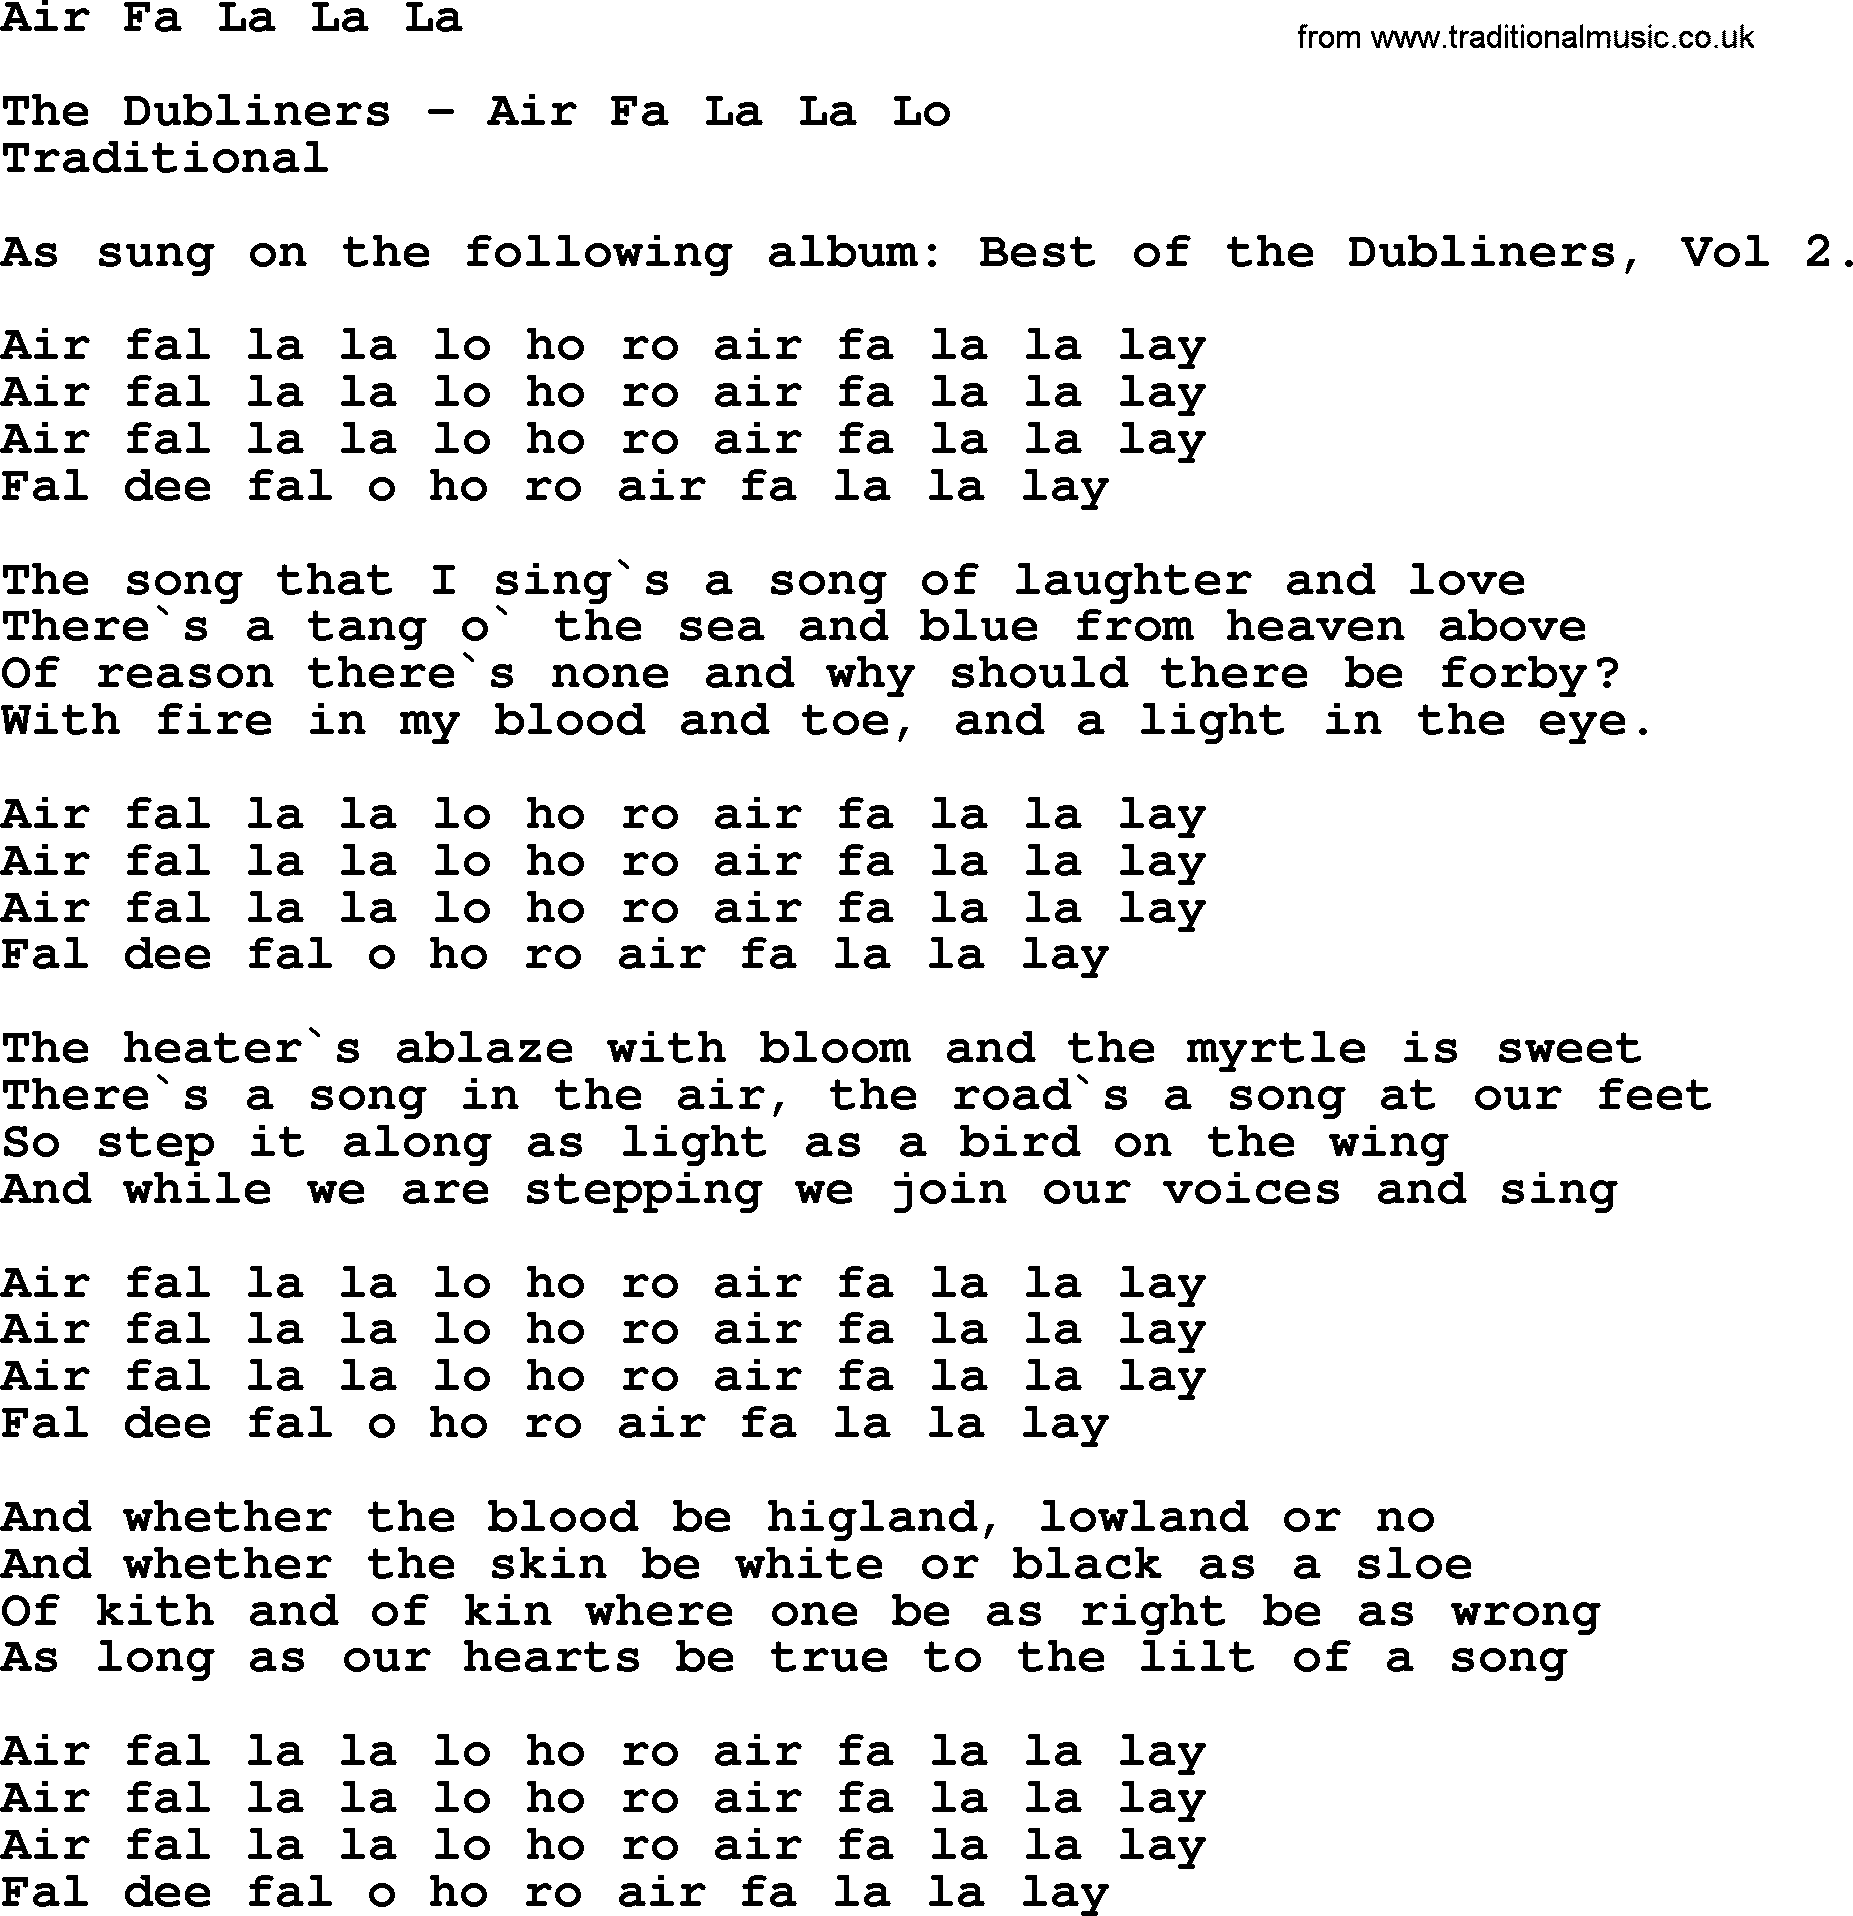 Air Fa La La La By The Dubliners Song Lyrics And Chords Explore 1 meaning and explanations or write yours. traditional music library